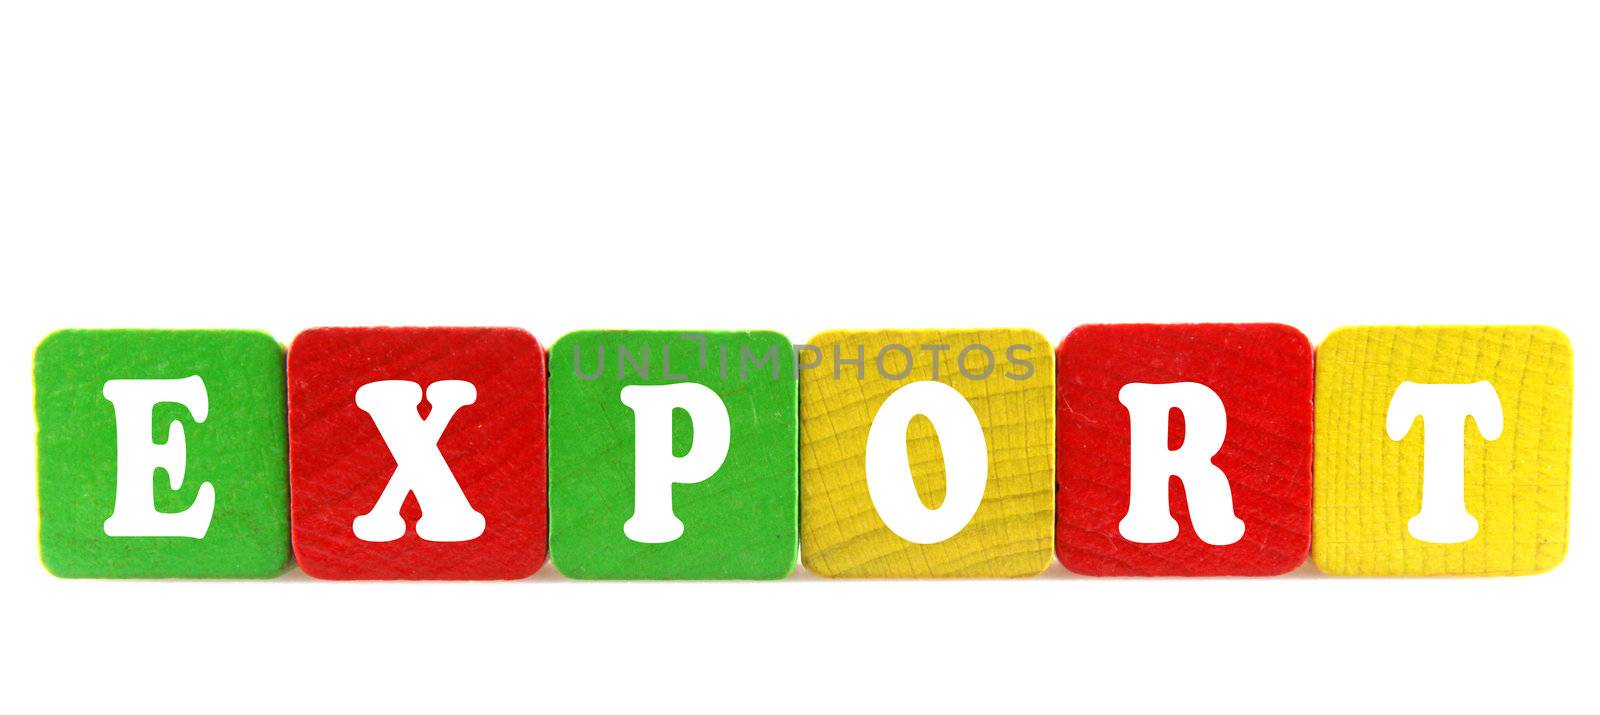 export - isolated text in wooden building blocks